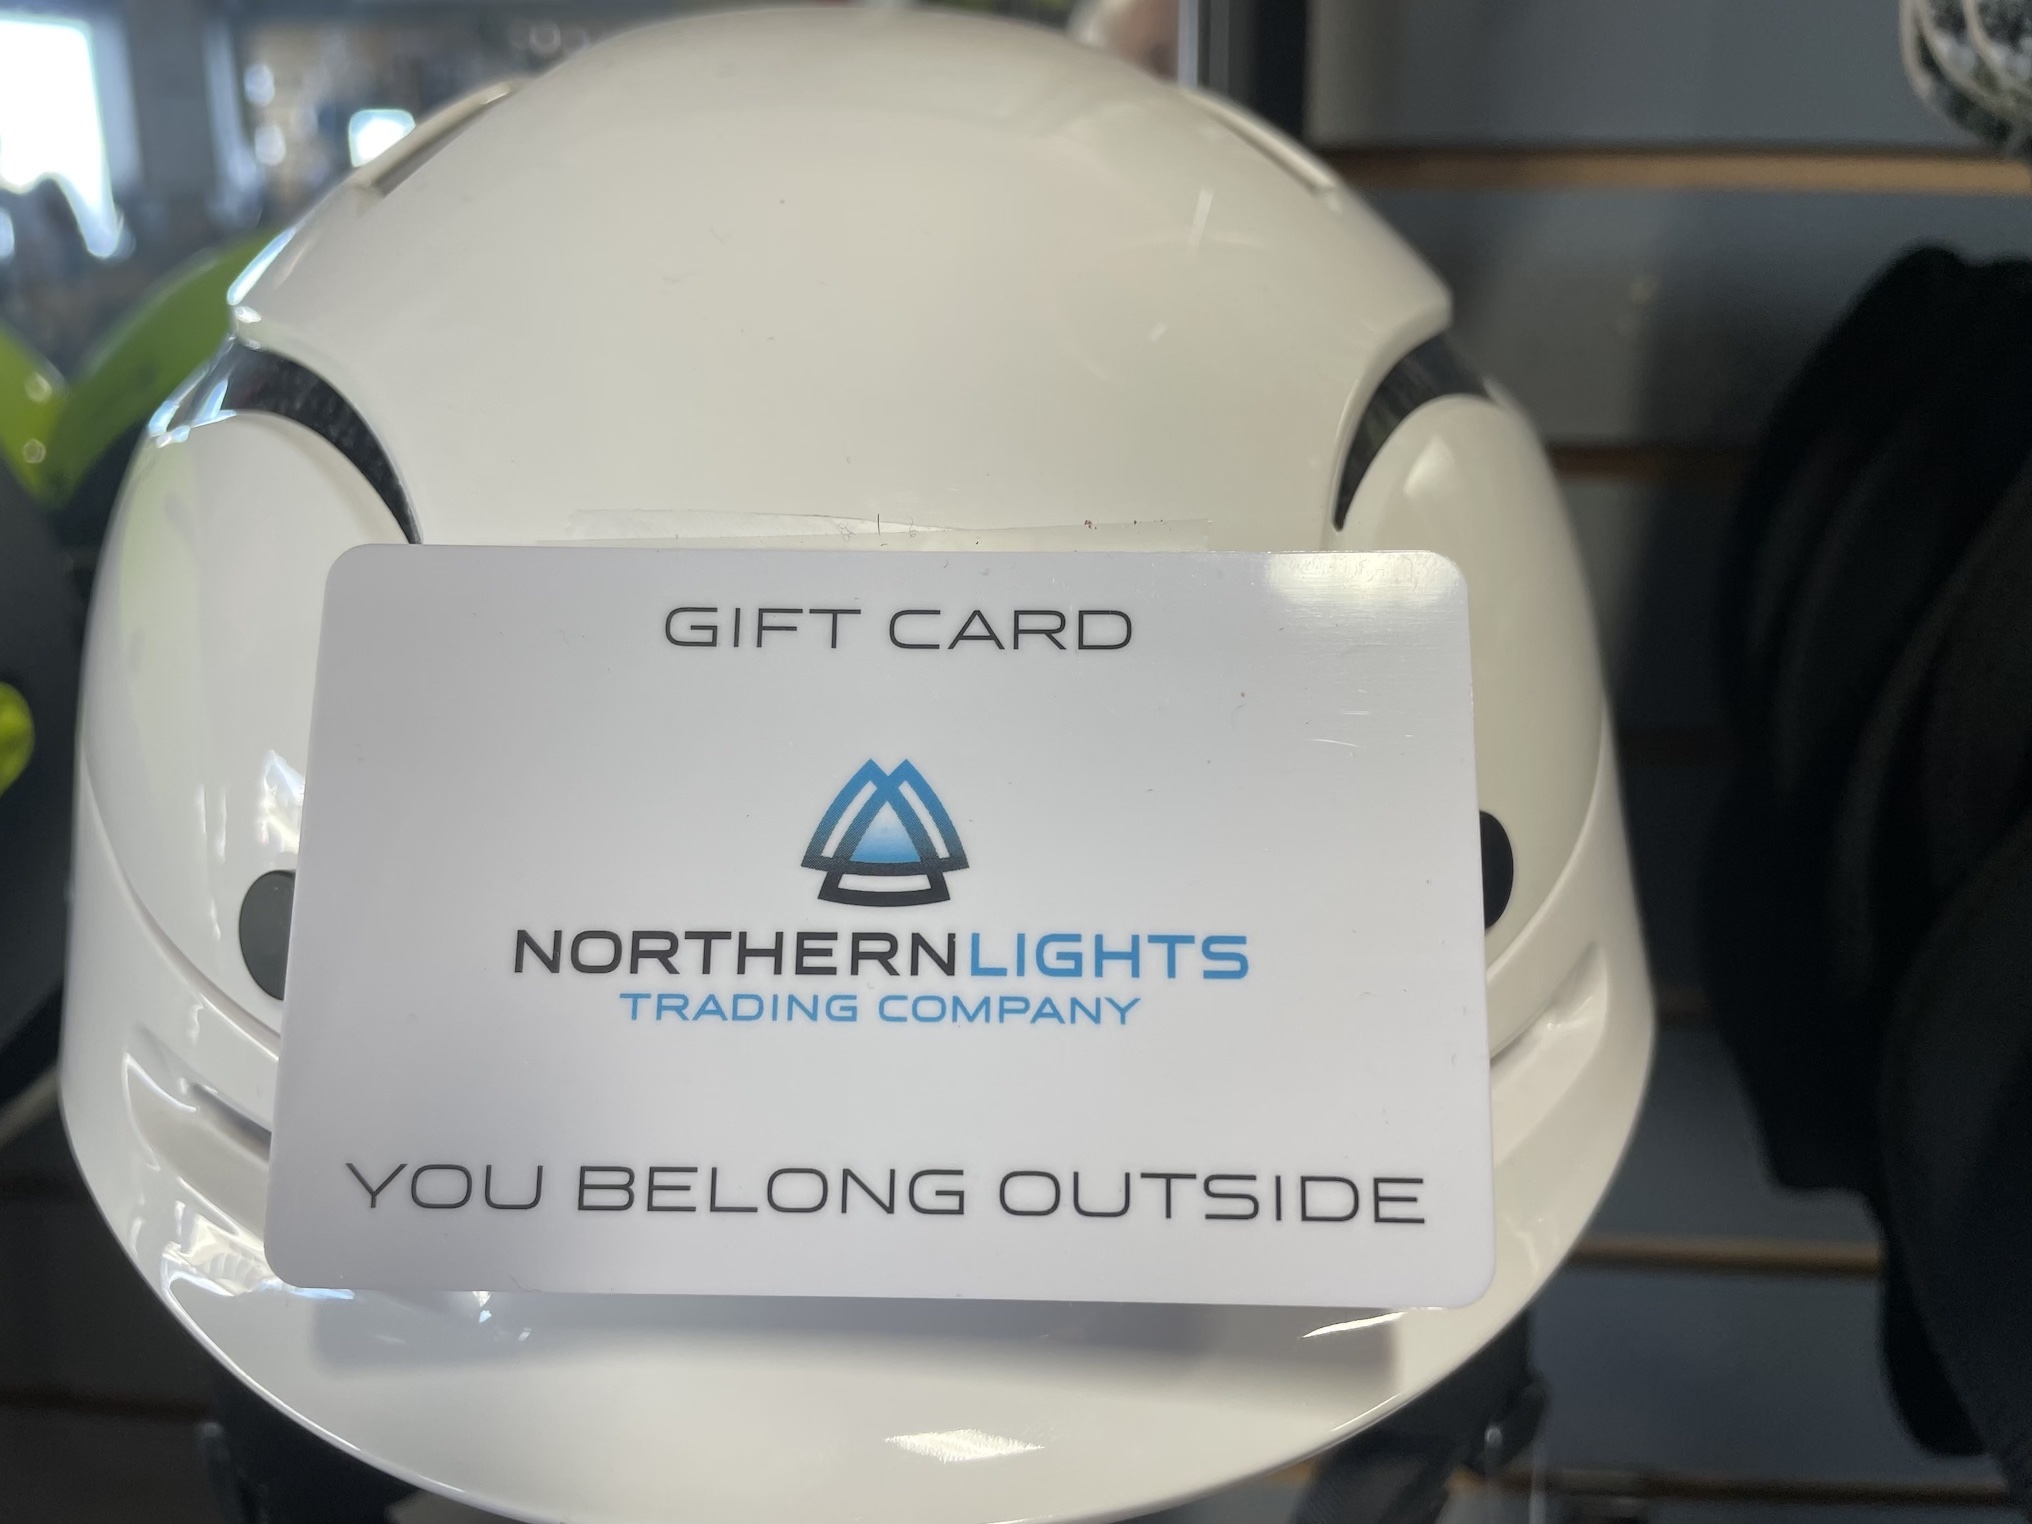 Northern Lights gift card is always a big hit!